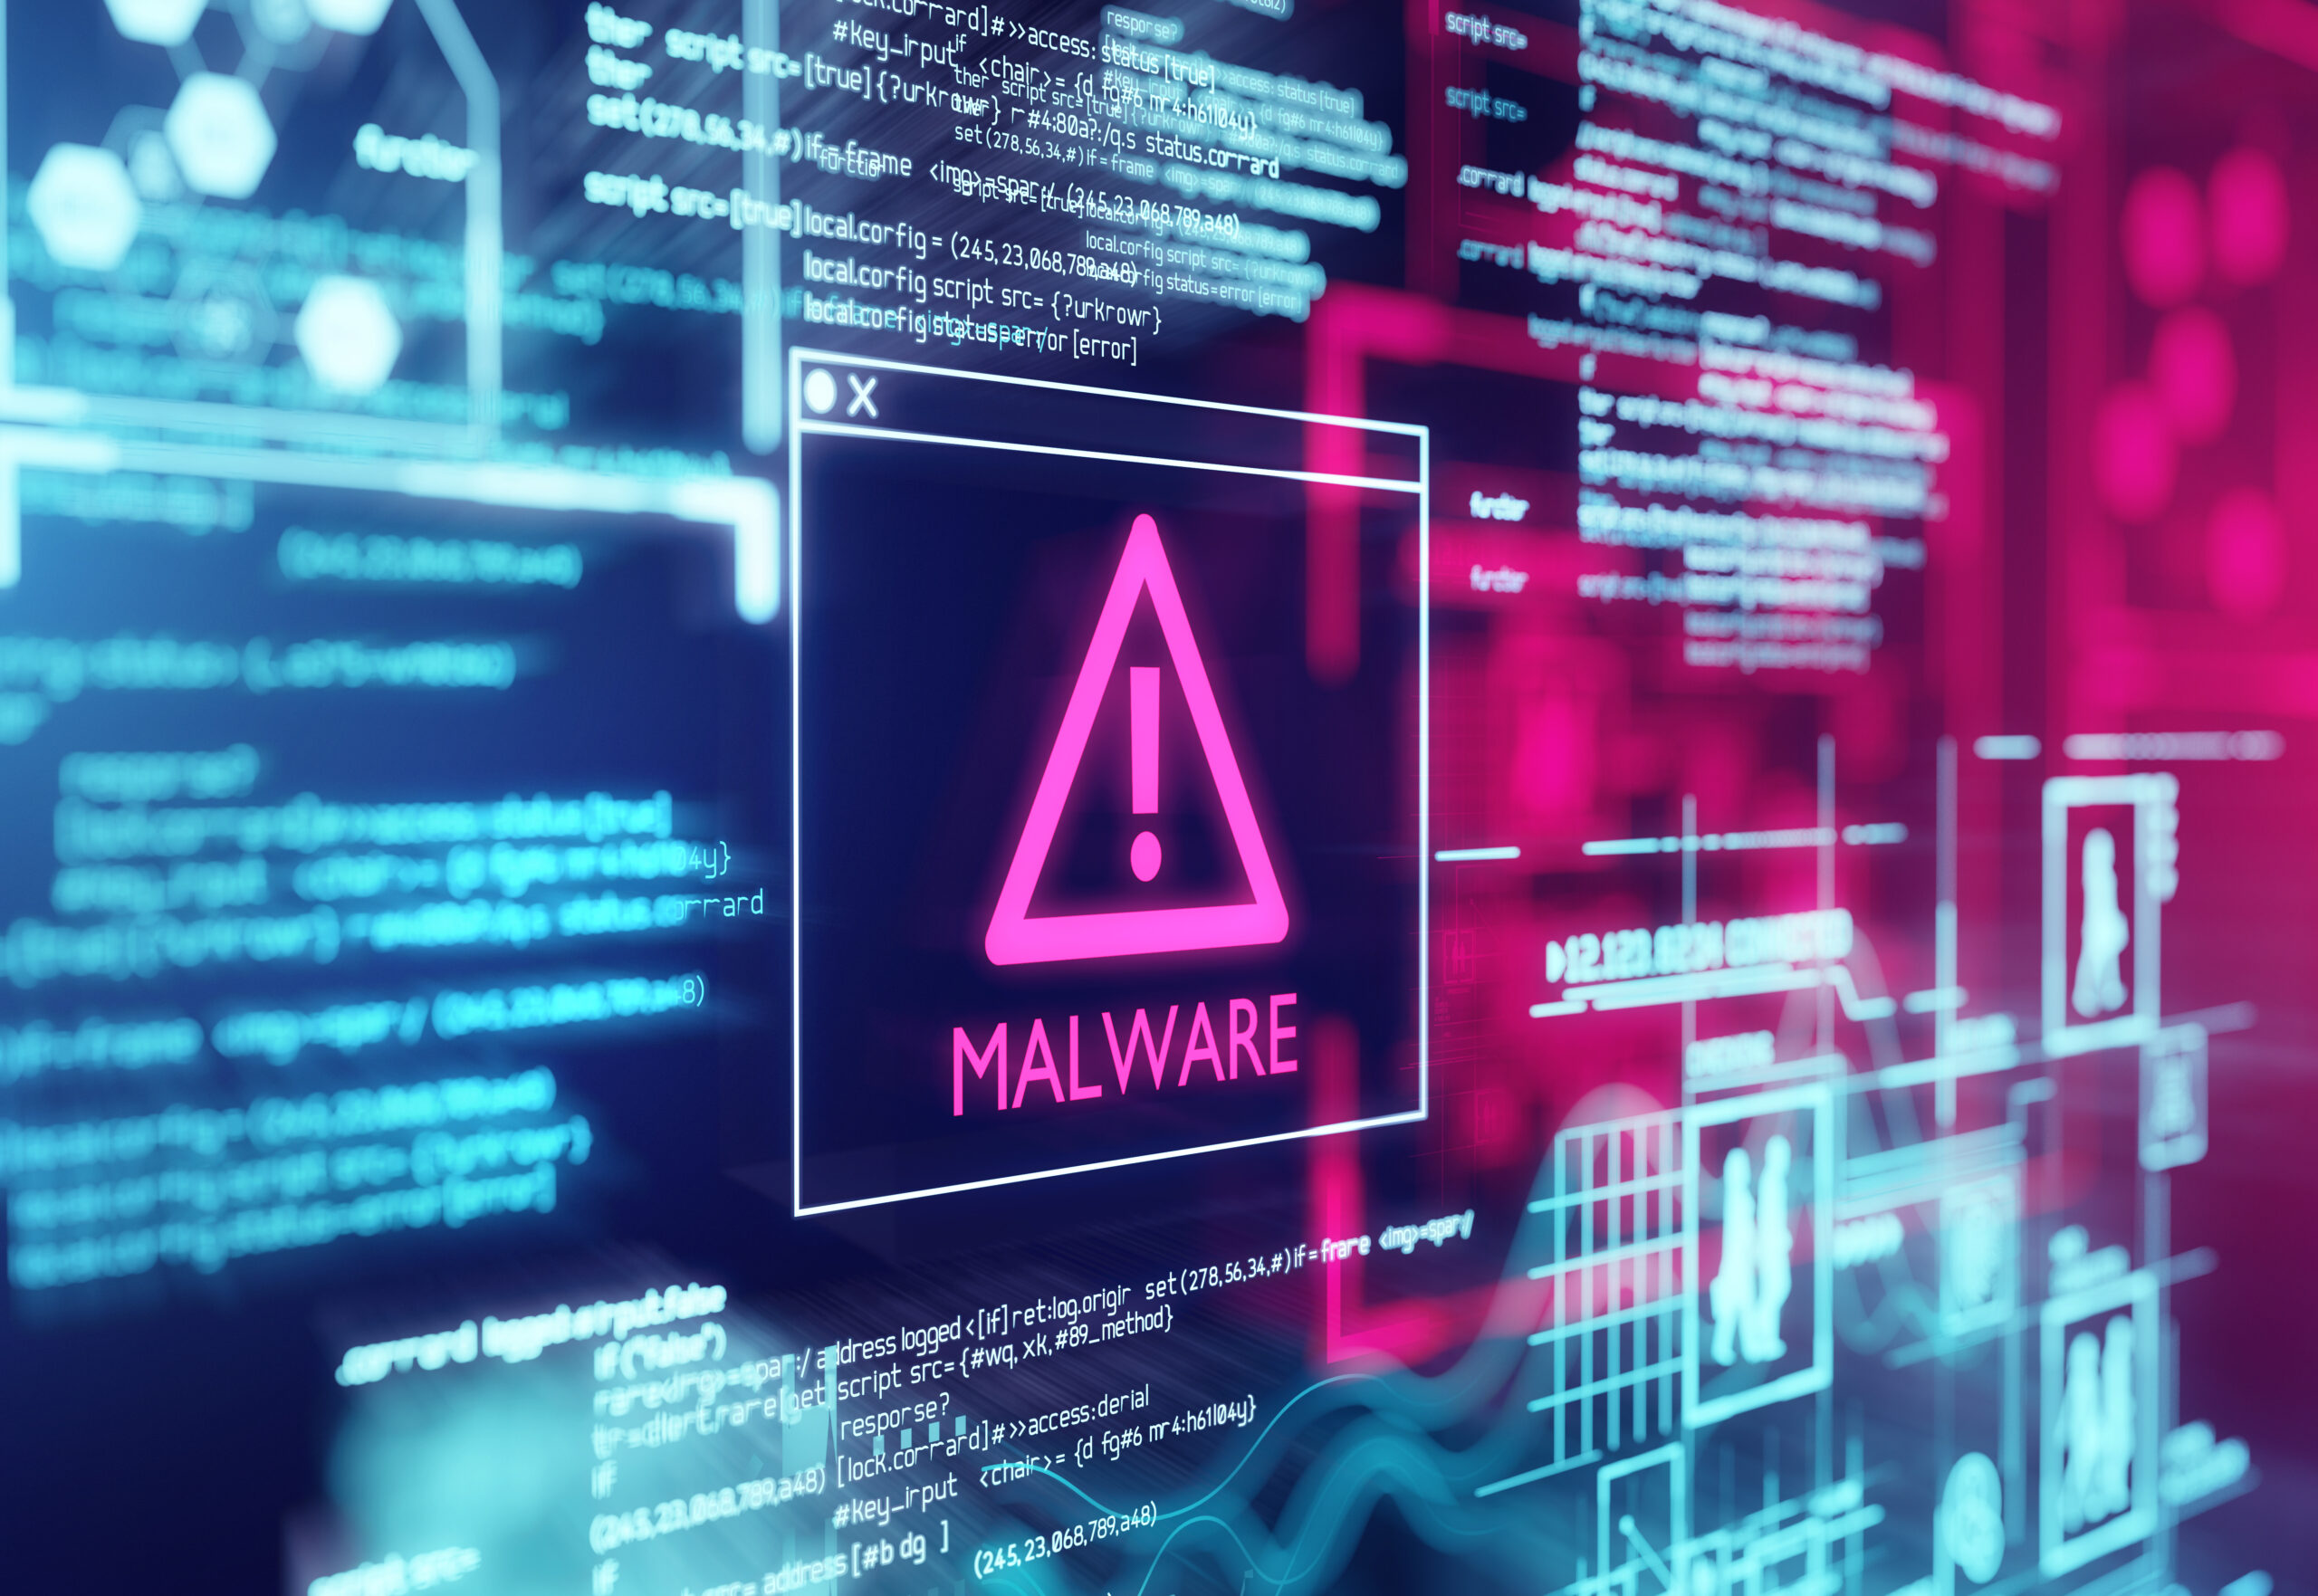 9 Most Common Types of Malware